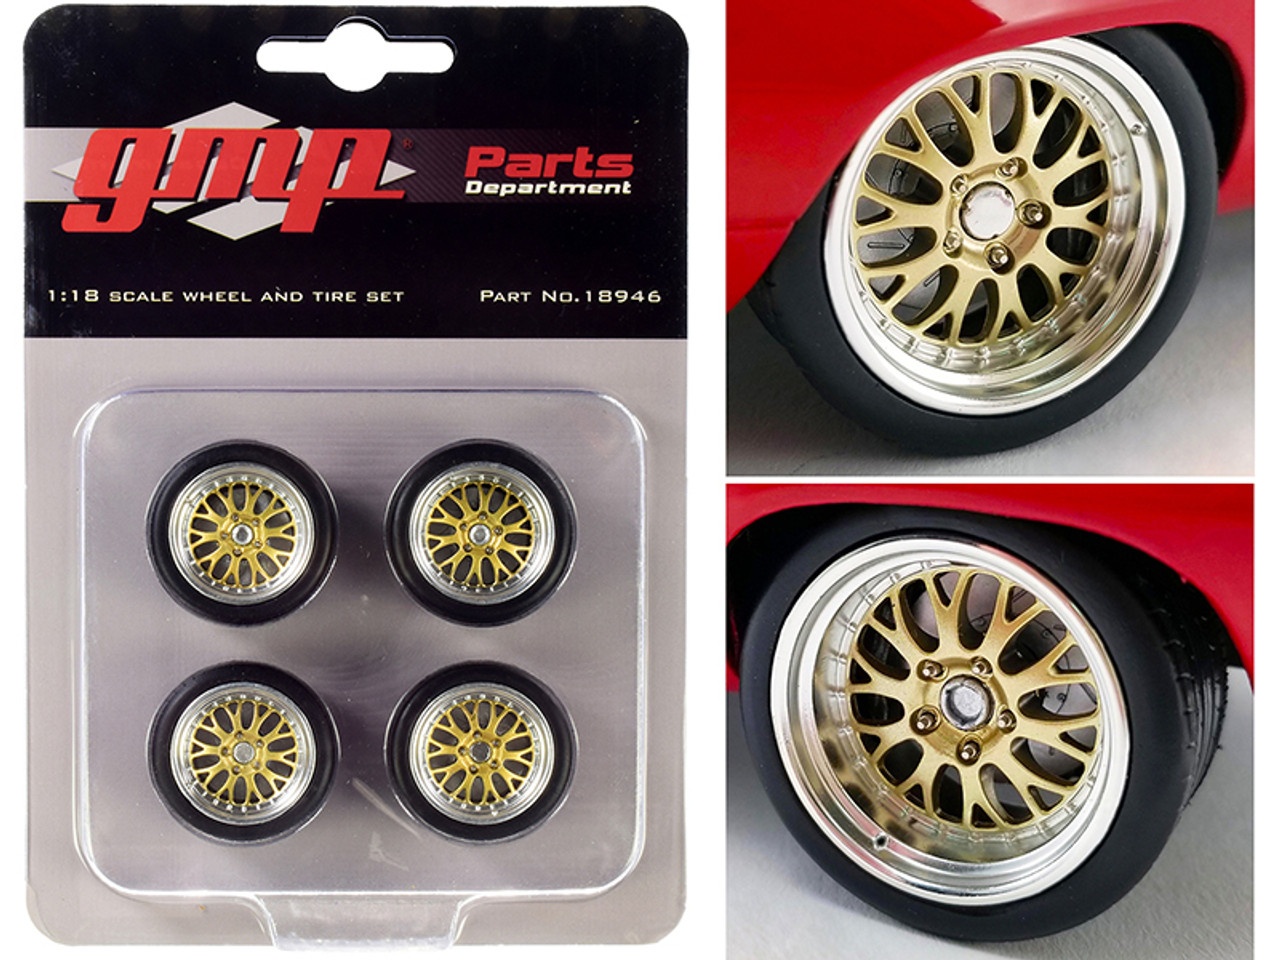 Big Red Pro Touring Wheels and Tires Set of 4 pieces from "1969 Chevrolet Camaro Big Red Camaro" 1/18 Scale by GMP